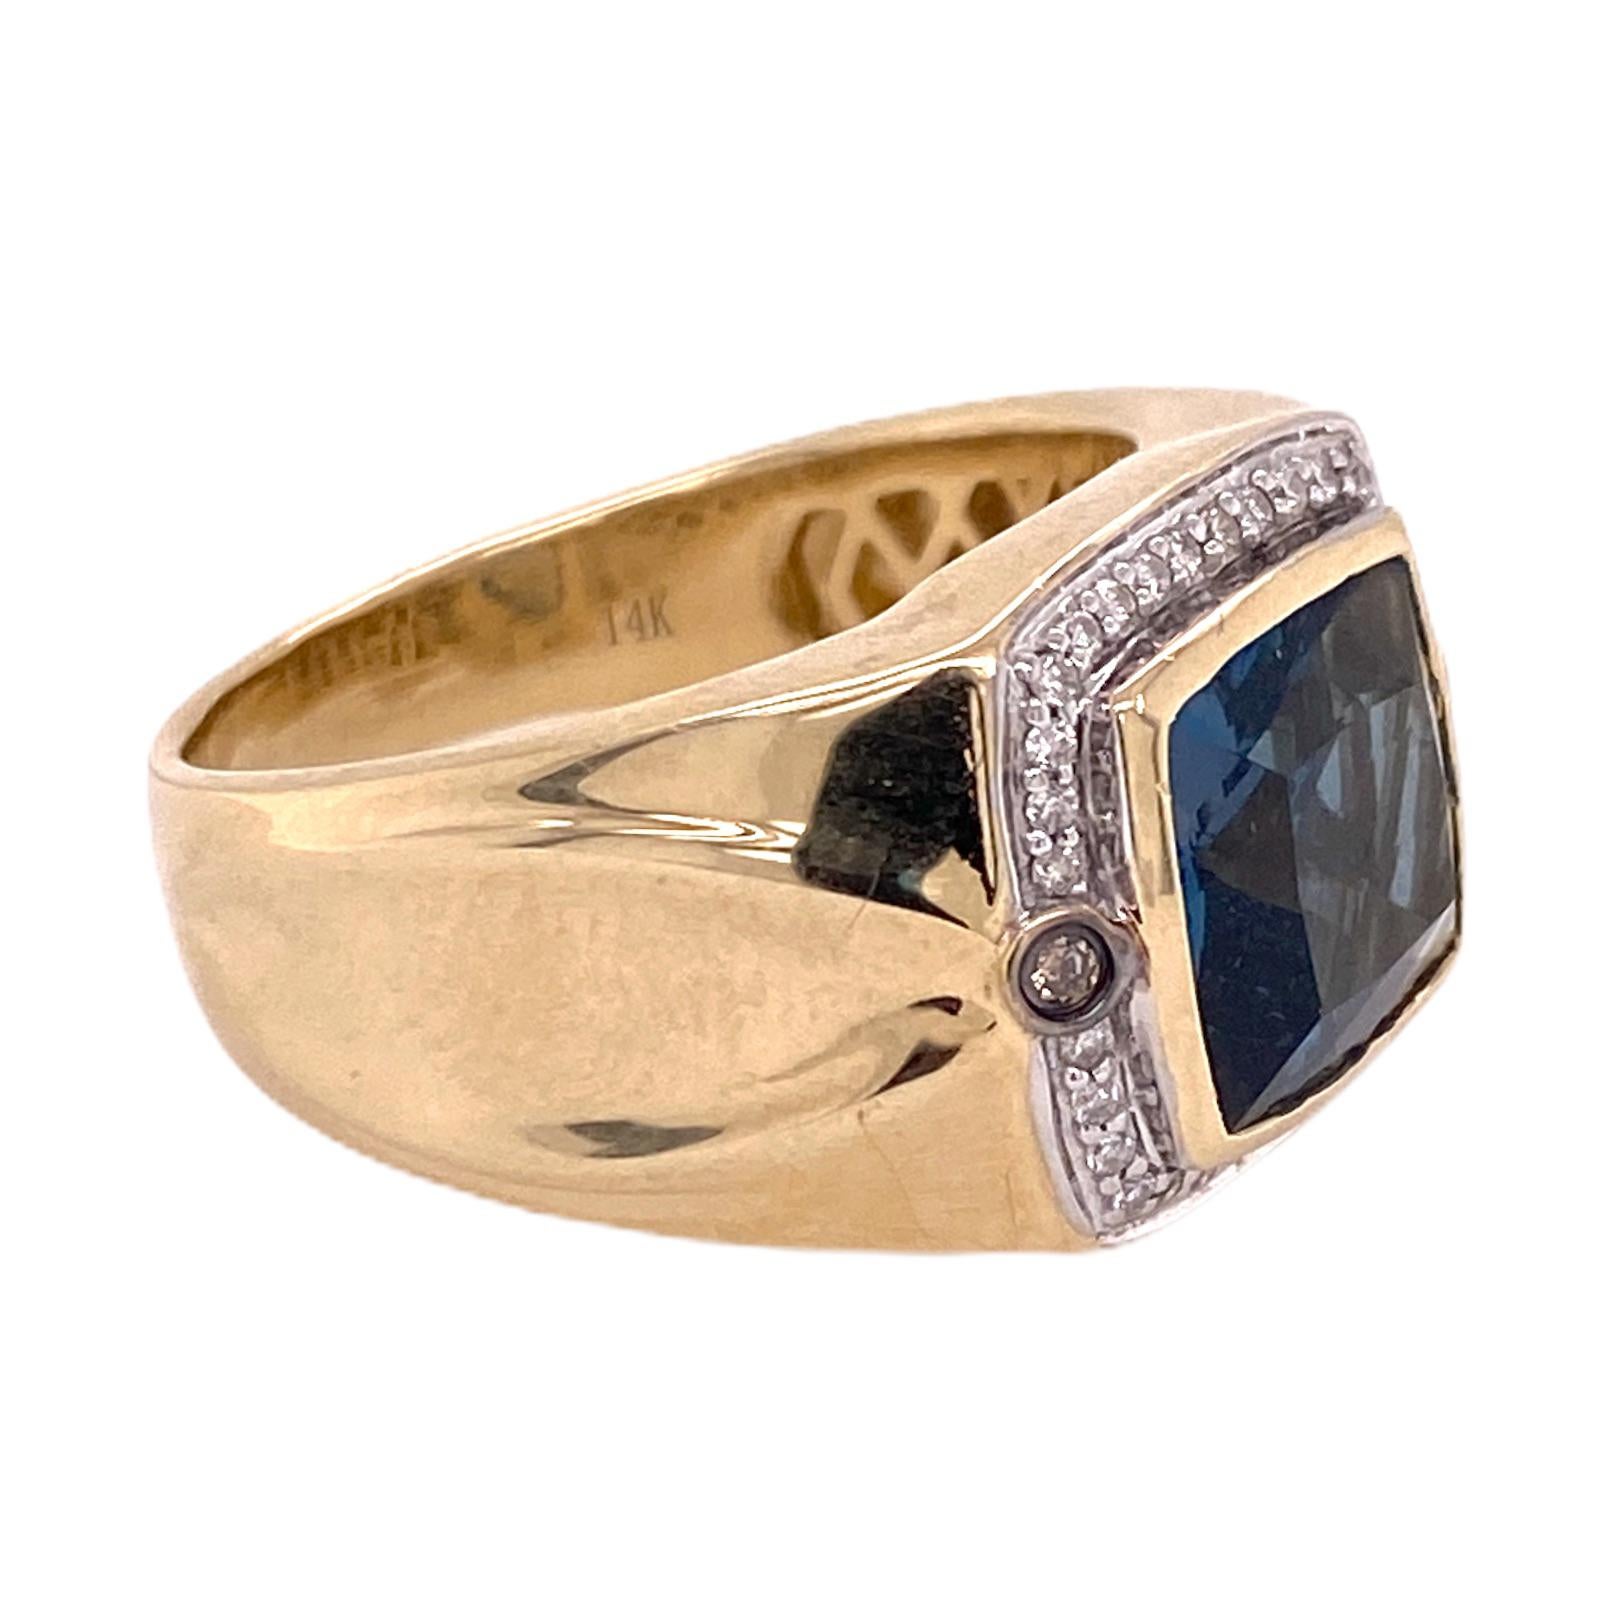 Fabulous Levian Men's ring fashioned in 14 karat yellow gold. The ring features a 4 carat cushion cut London Blue Topaz. The topaz is surrounded by 36 round brilliant cut diamonds (white and chocolate) weighing .25 carat total weight. The ring